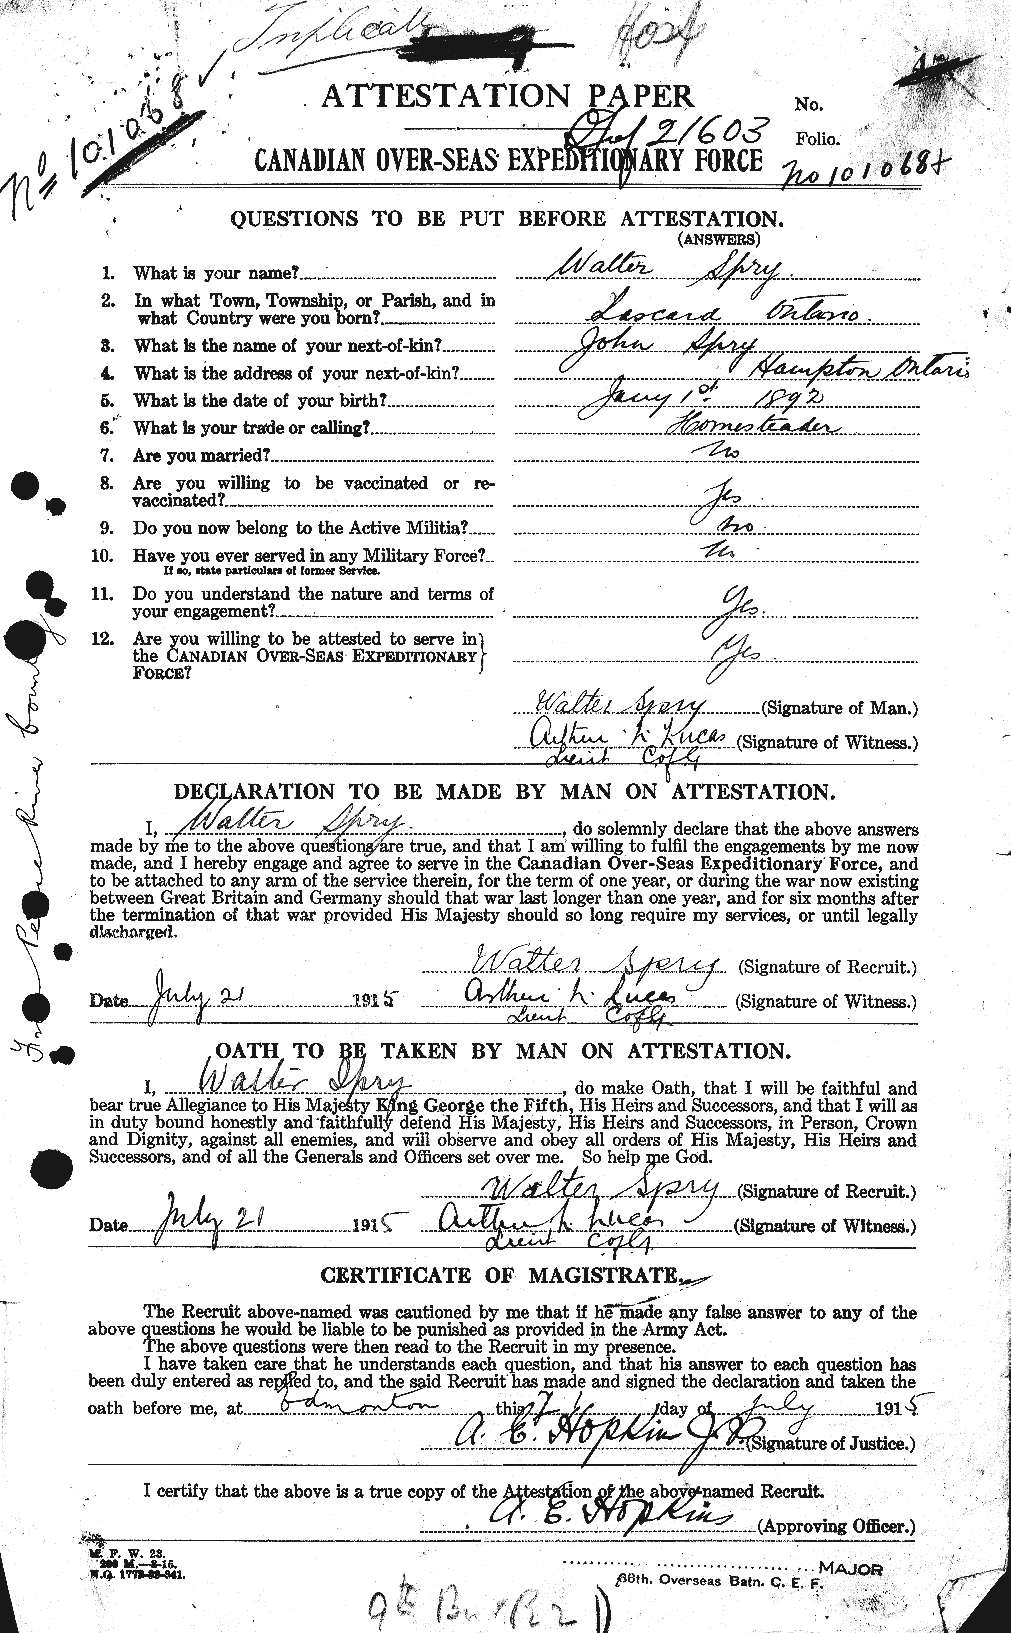 Personnel Records of the First World War - CEF 115522a